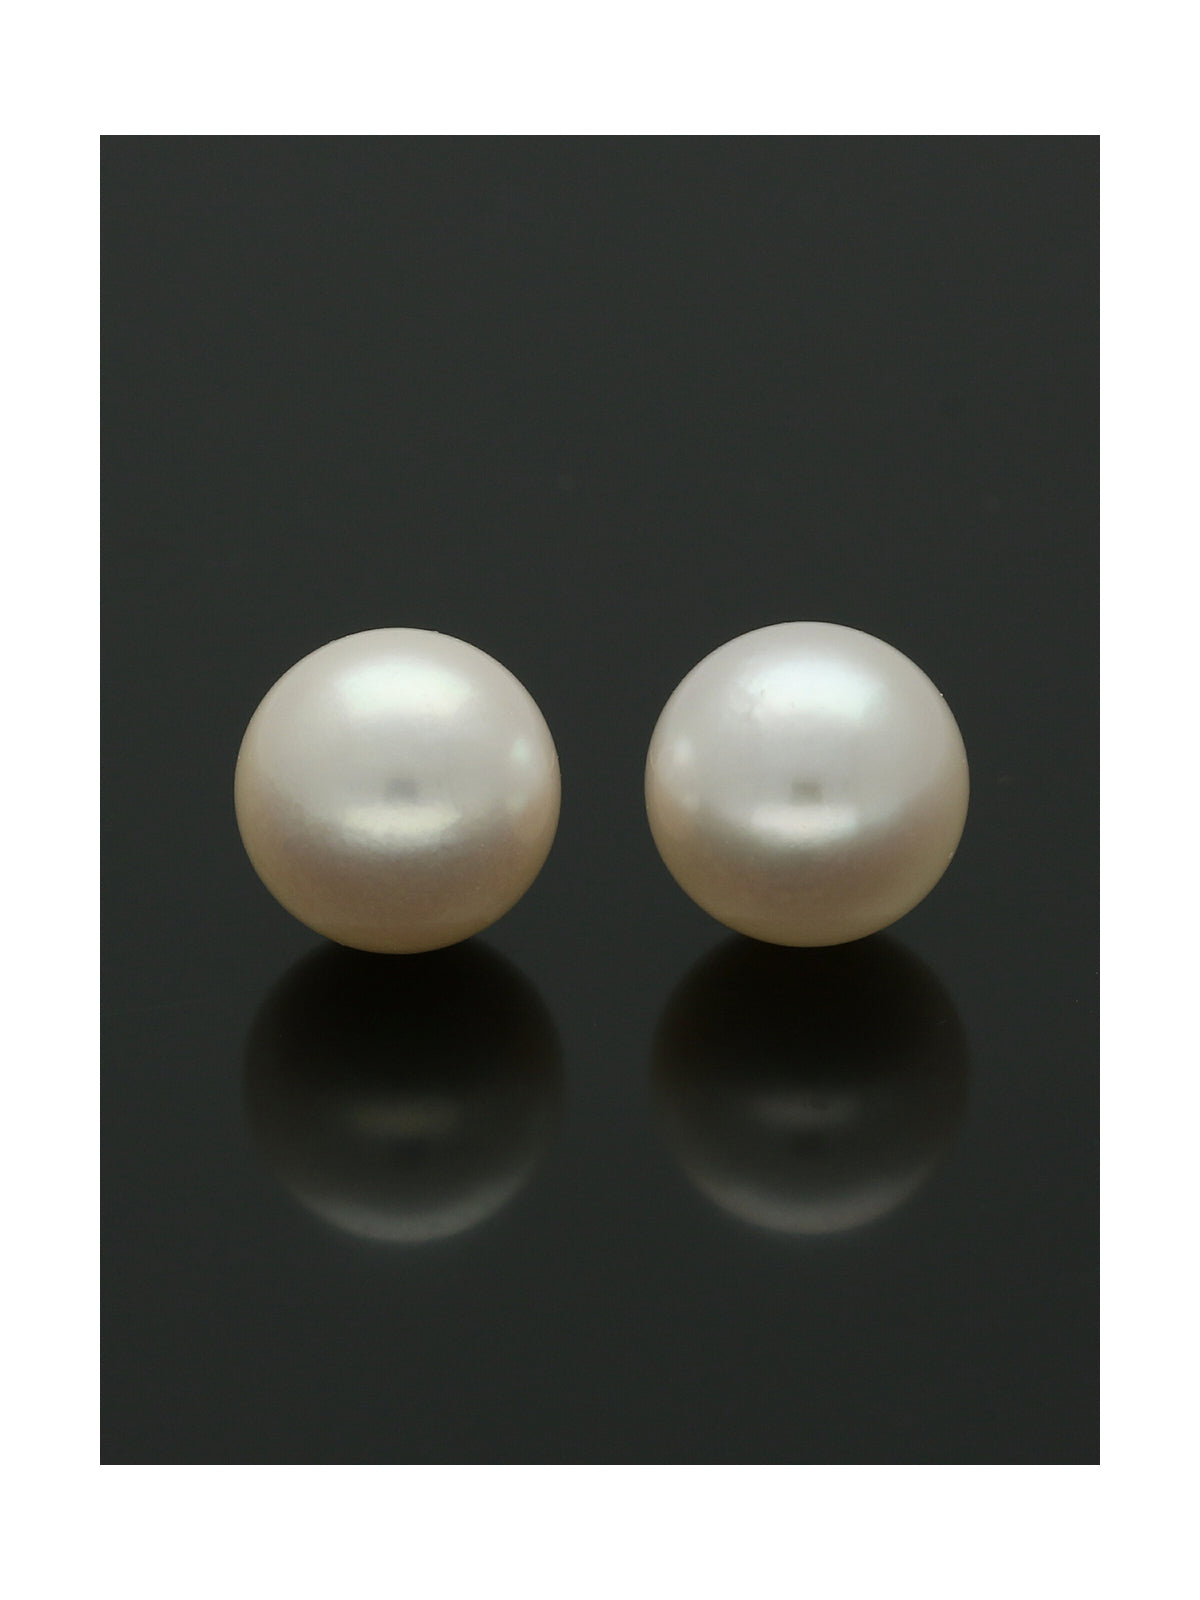 White Cultured Pearl Stud Earrings 9mm in 9ct Yellow Gold